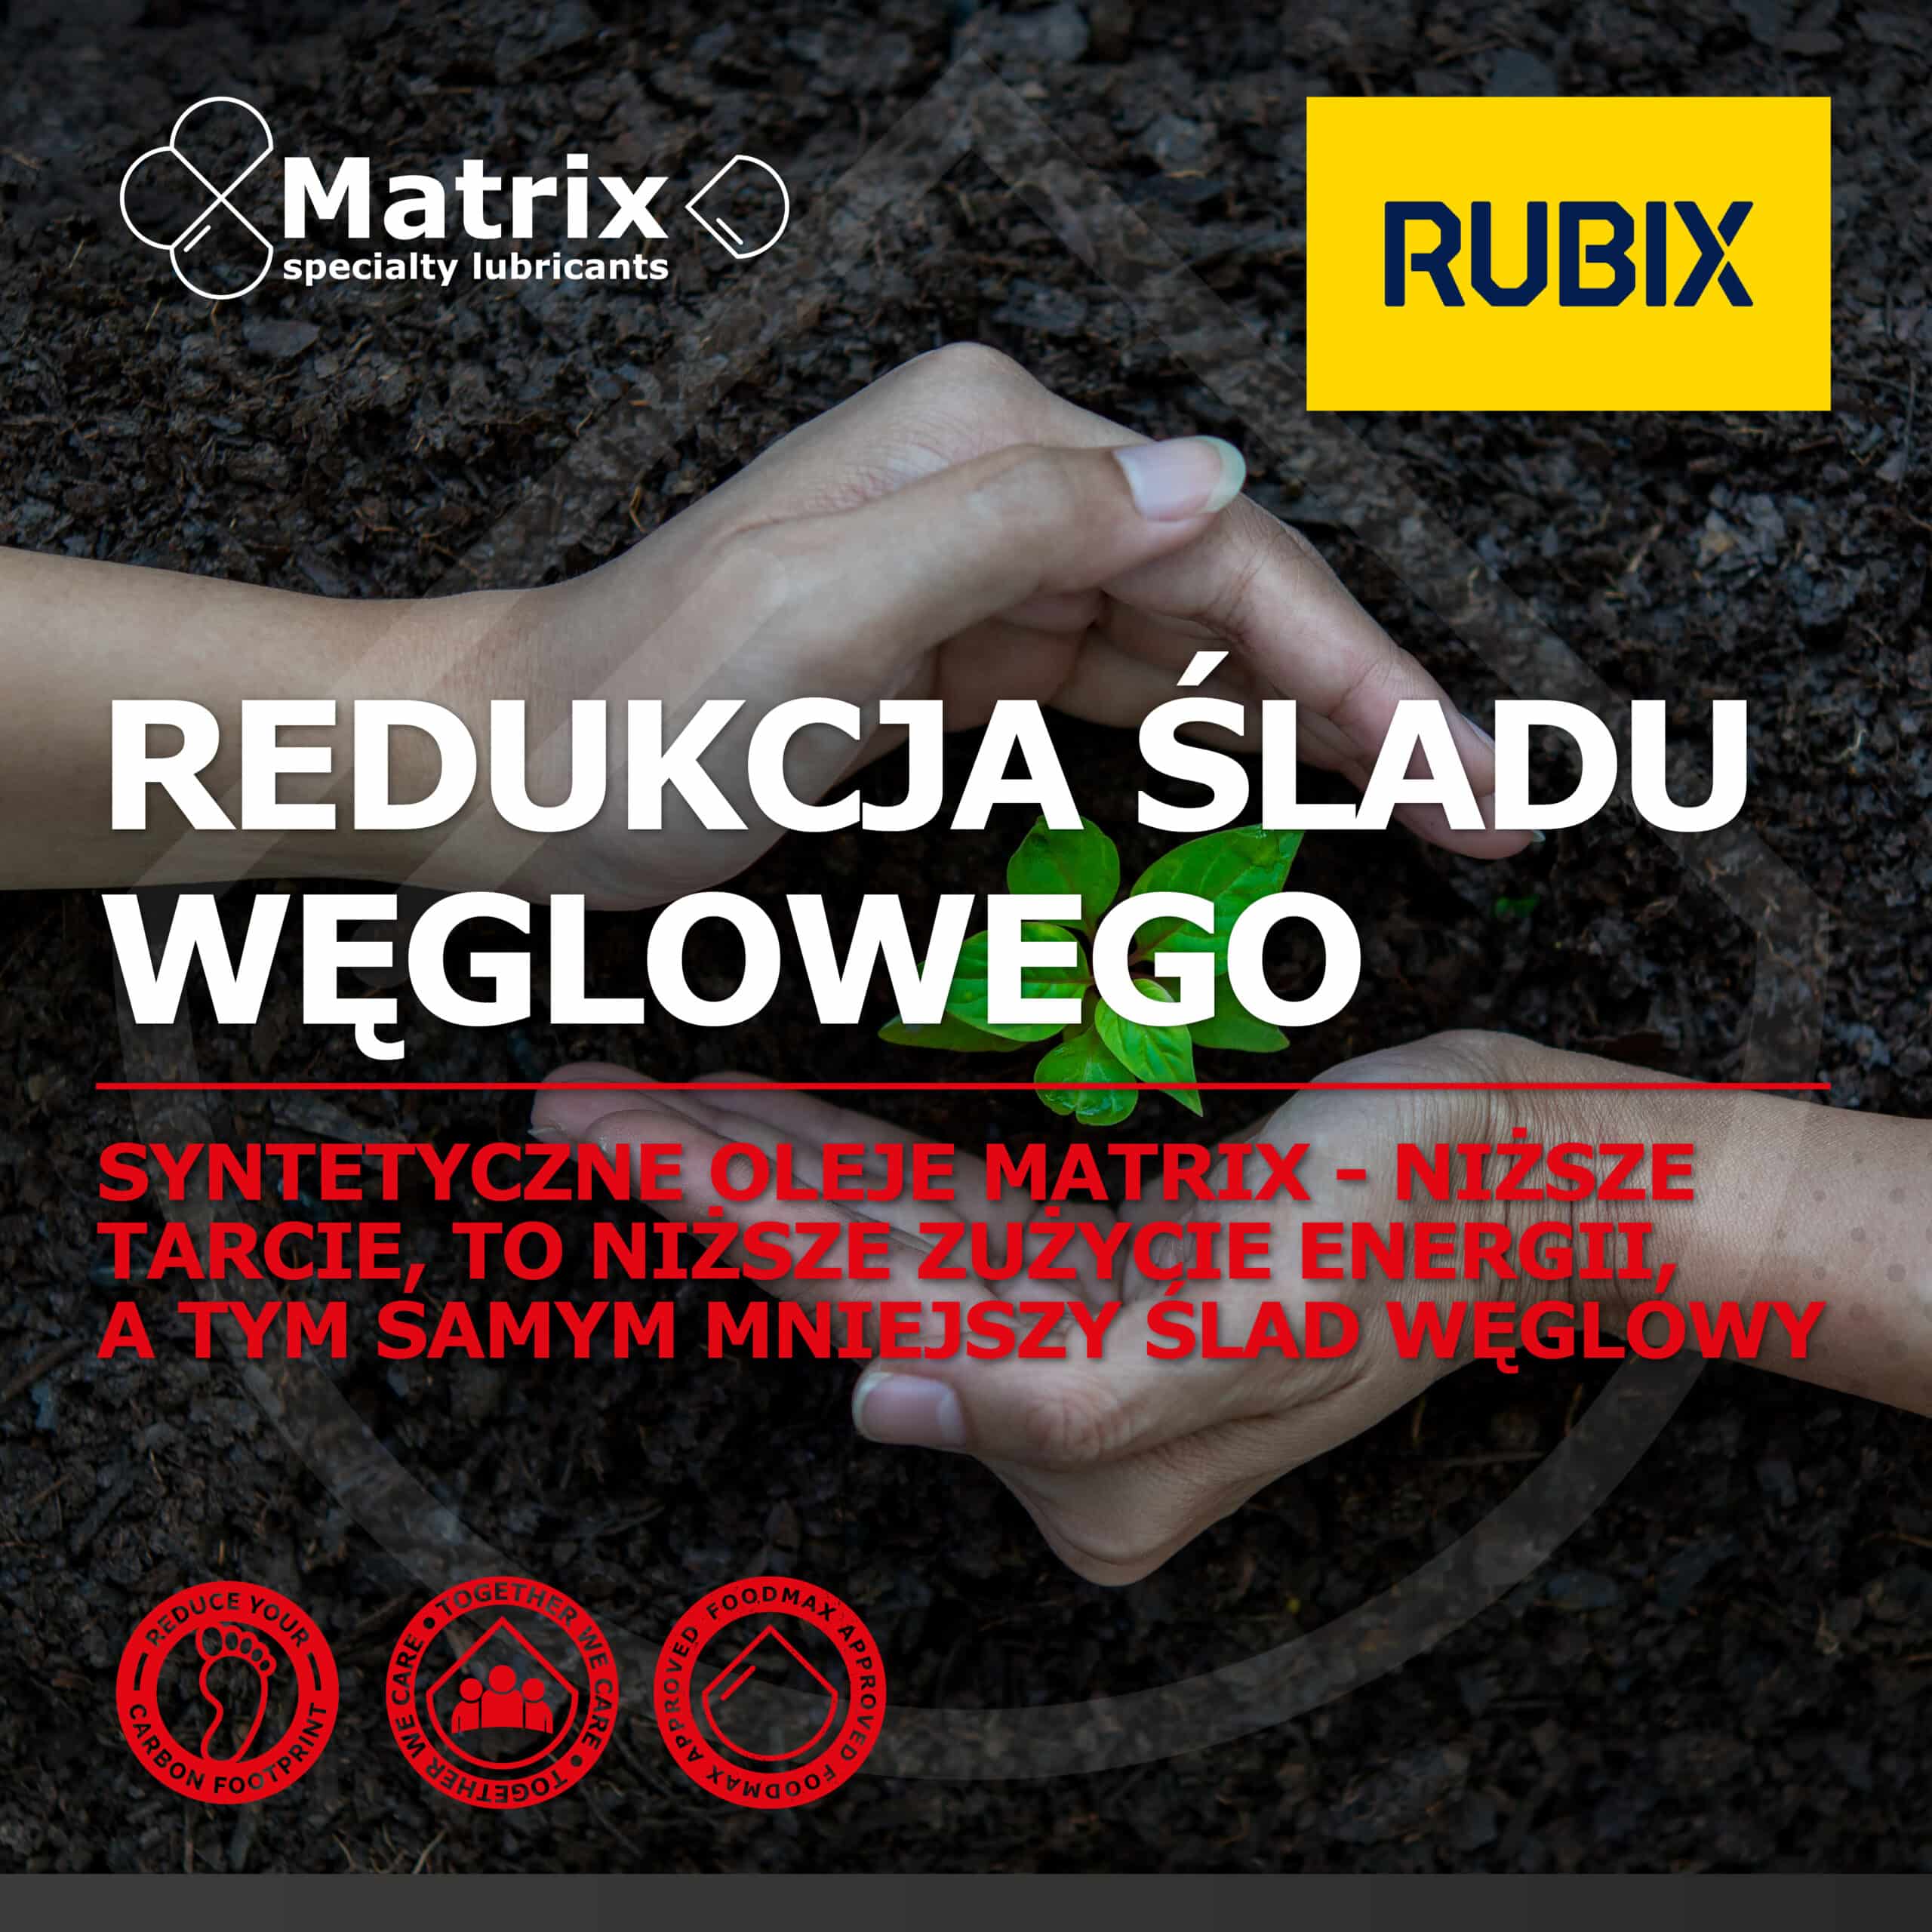 Matrix specialty lubricants carbon footprint reduction, collaboration with Rubix